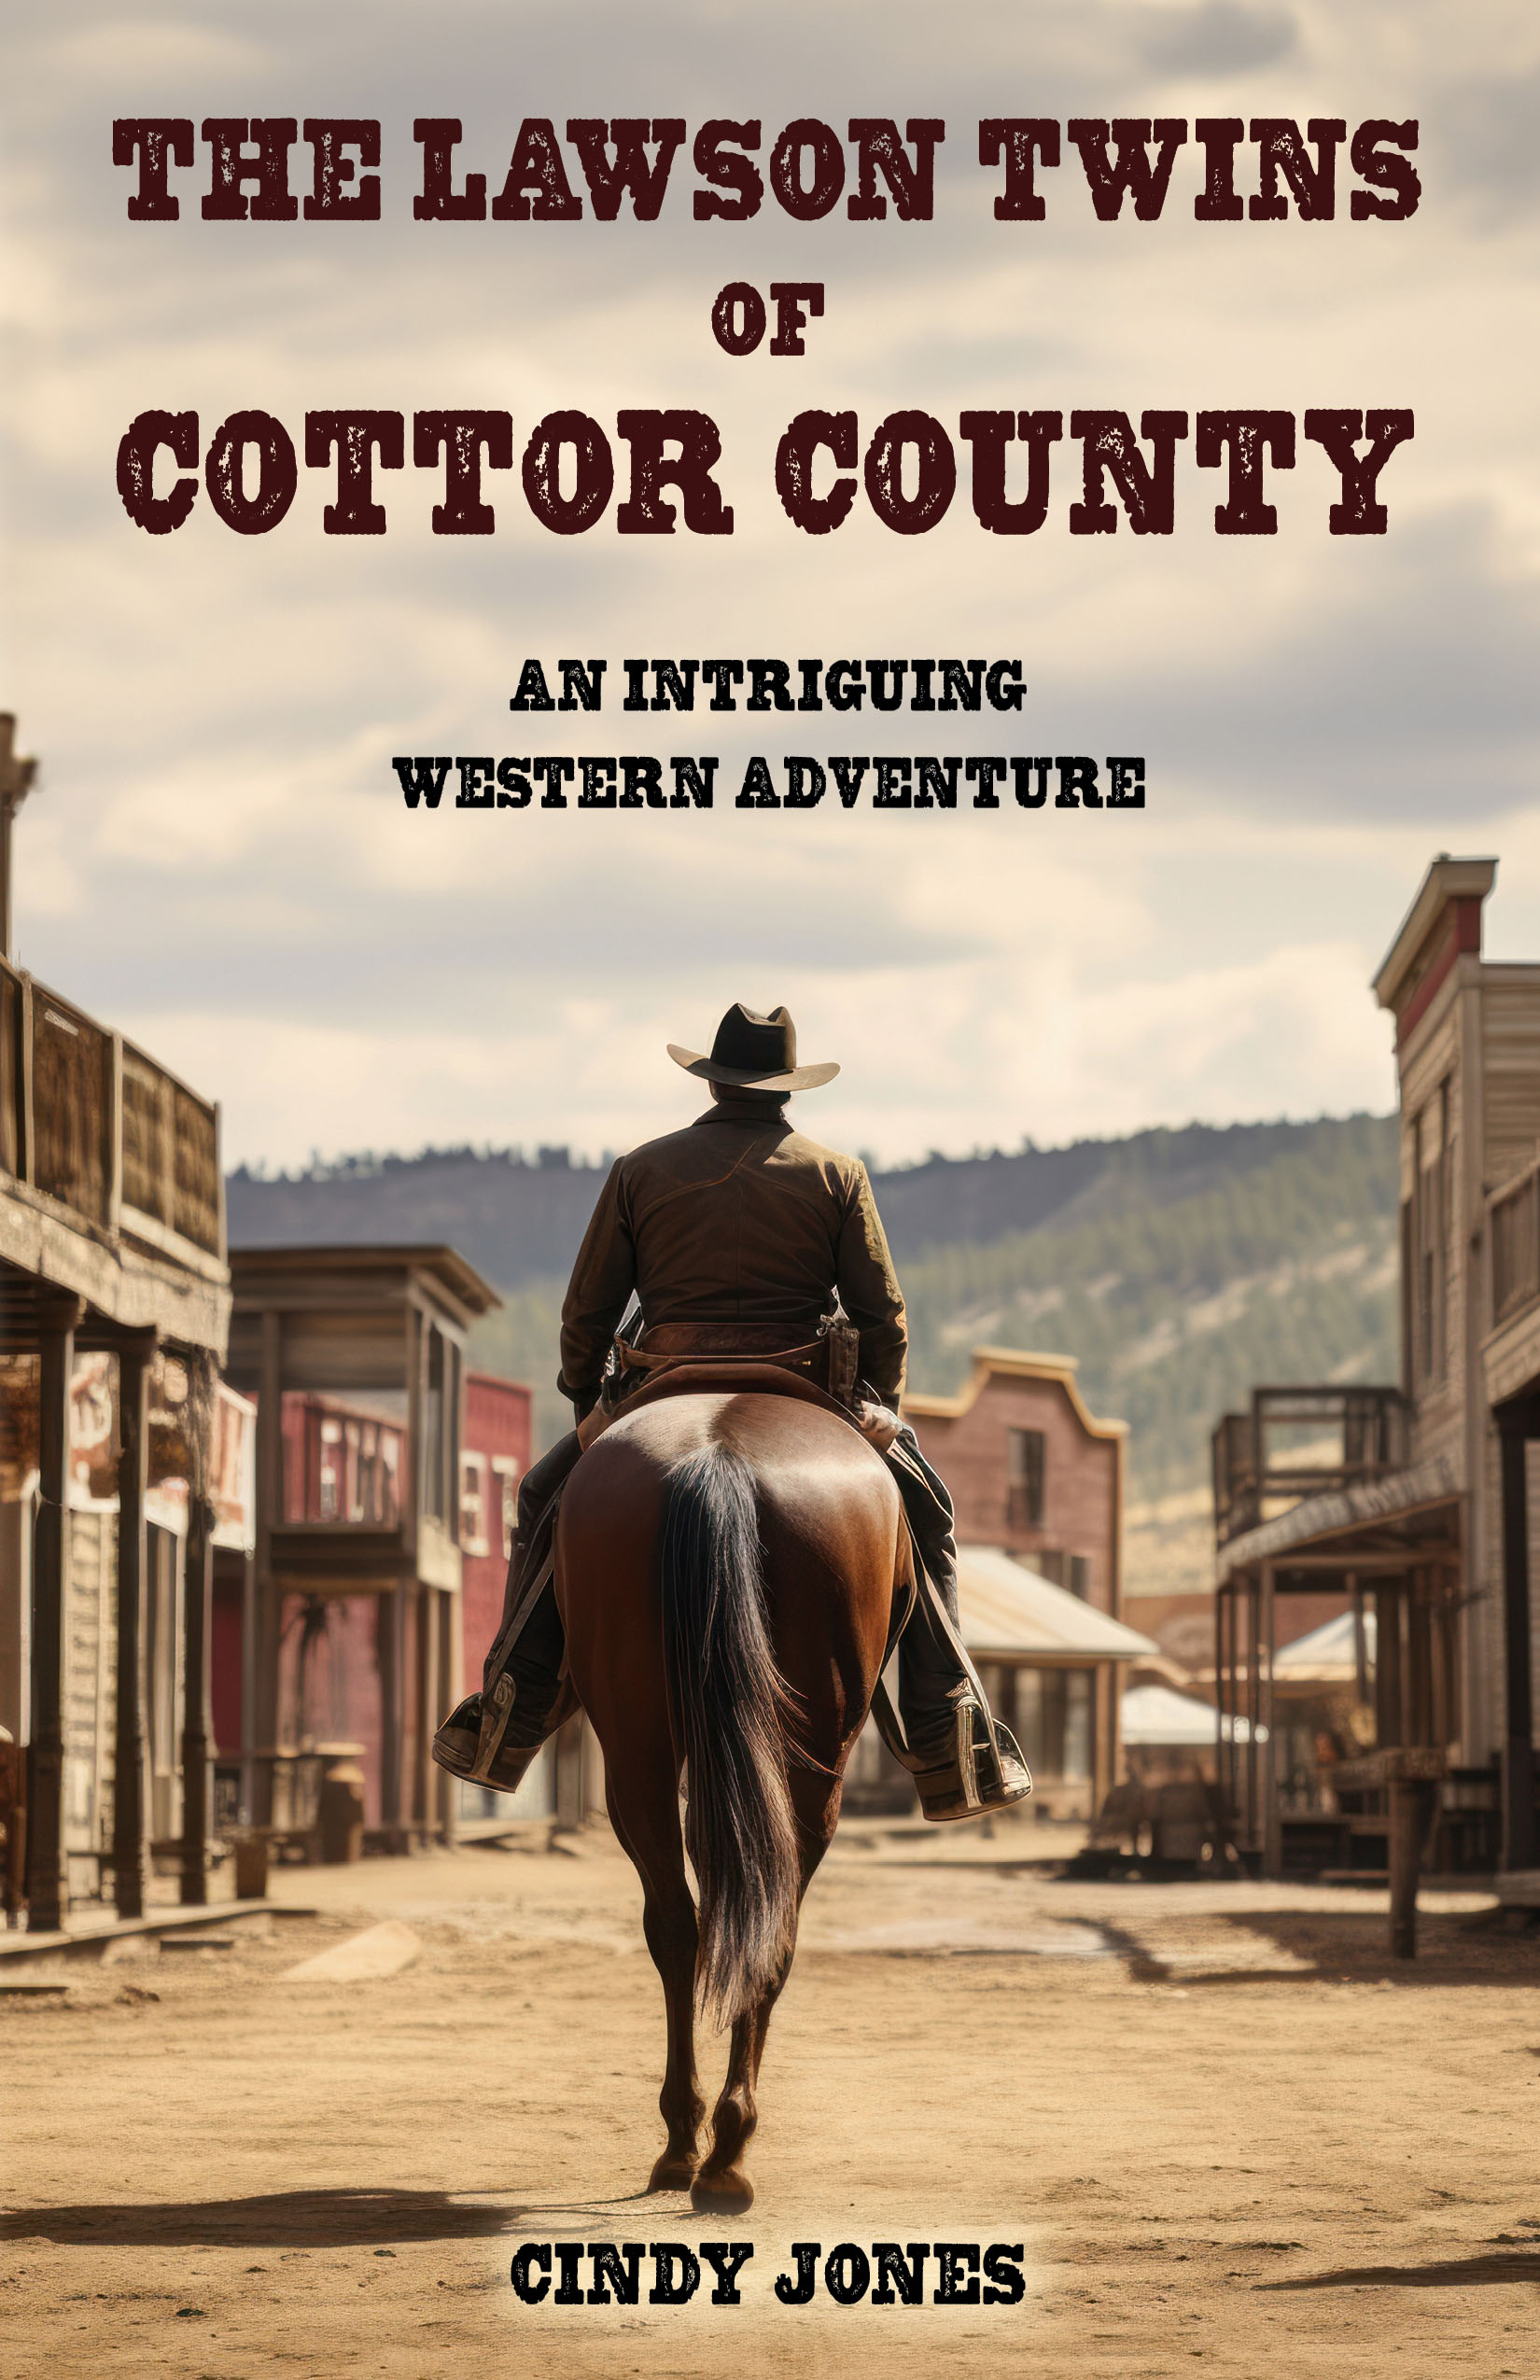 The Lawson Twins of Cottor County by Cindy Jones